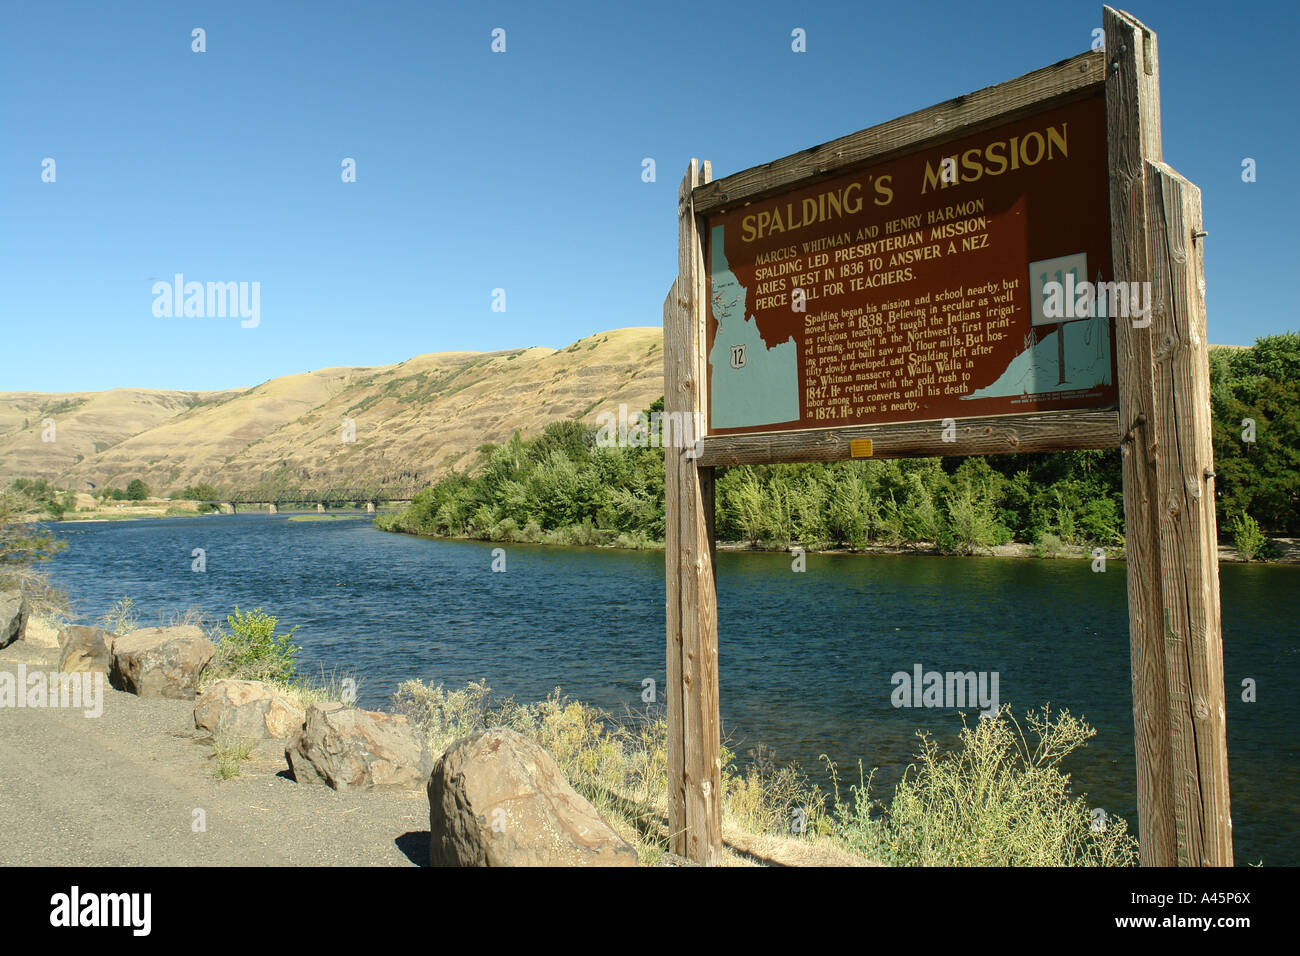 AJD56135, ID, Idaho, Clearwater River, Nez Perce Indian Reservation, Northwest Passage National Scenic Byway, historical markers Stock Photo